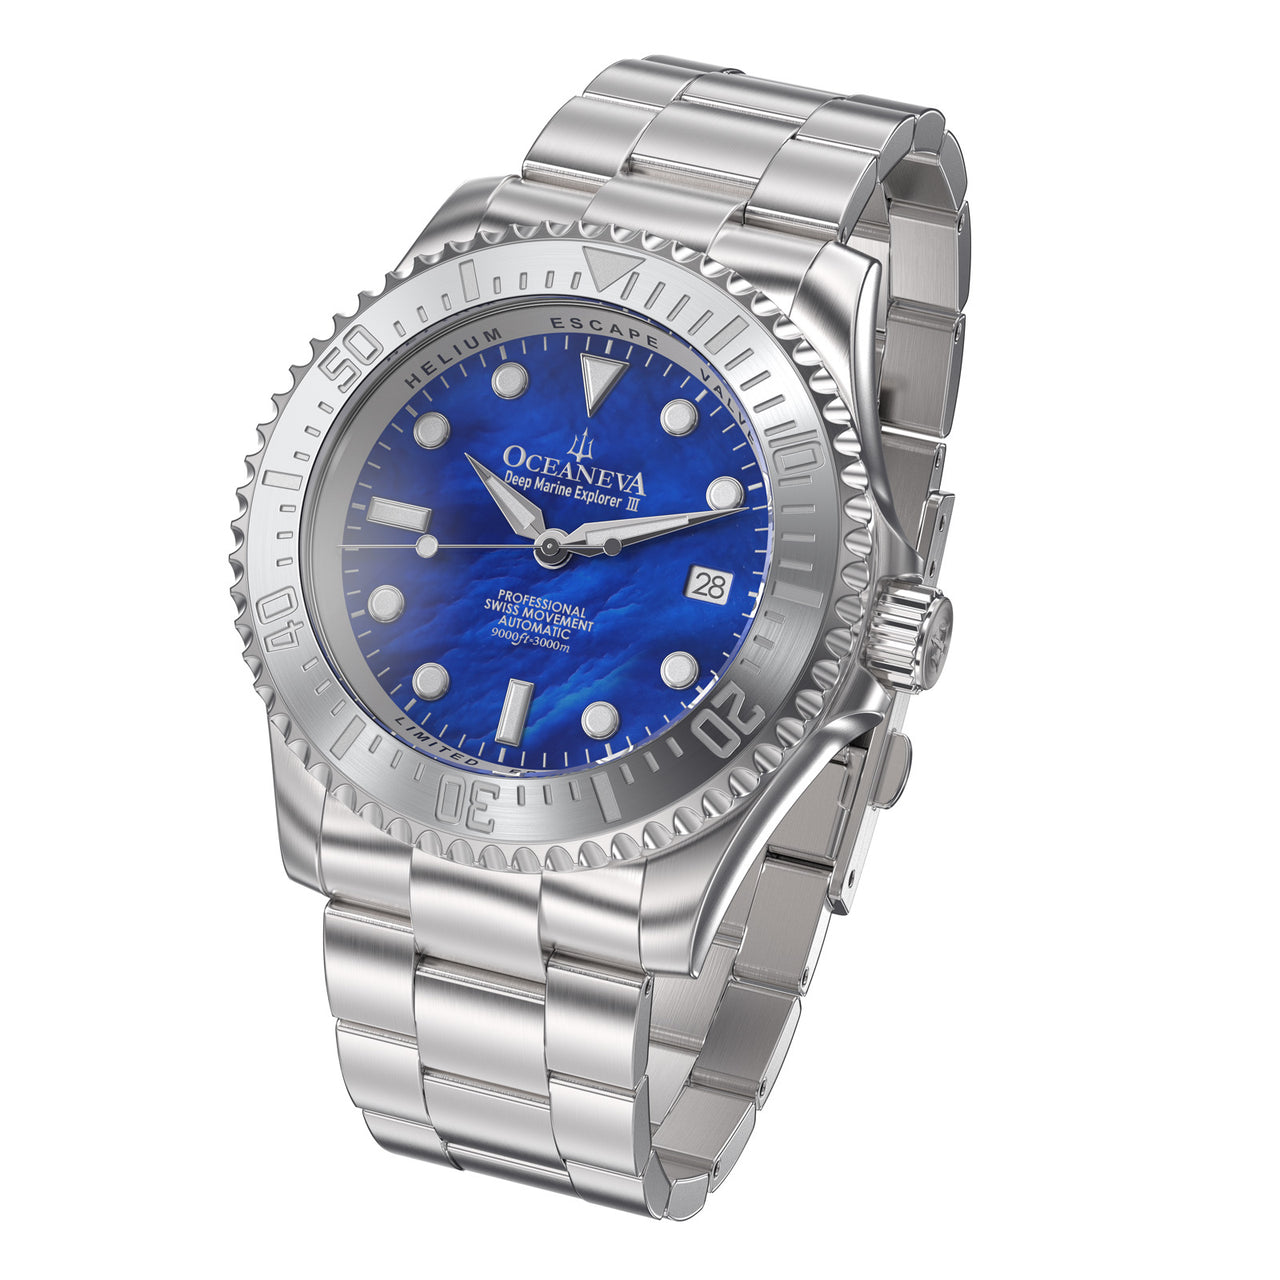 Oceaneva 3000M Dive Watch Blue Mother of Pearl Front Picture Slight Left Slant View